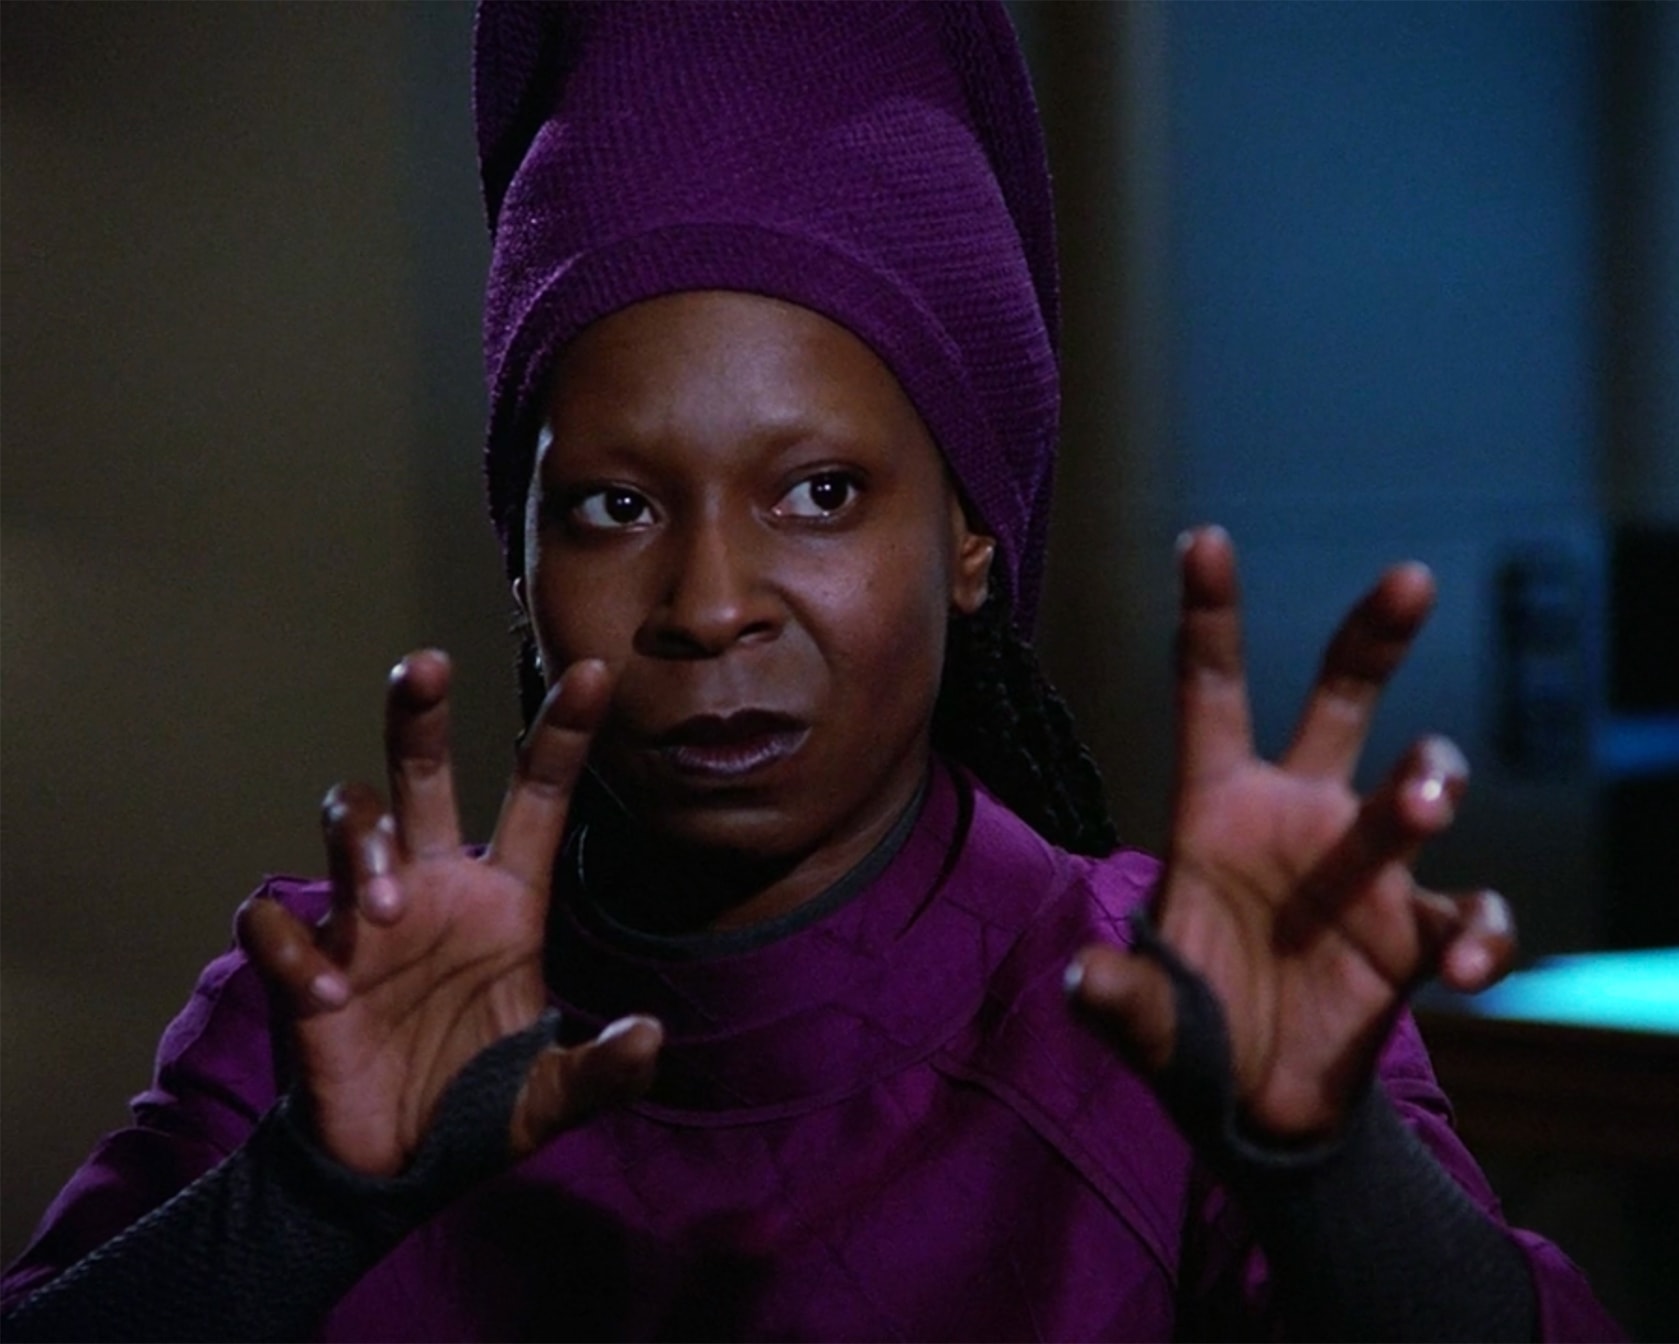 Is it Uhura or Guinan?